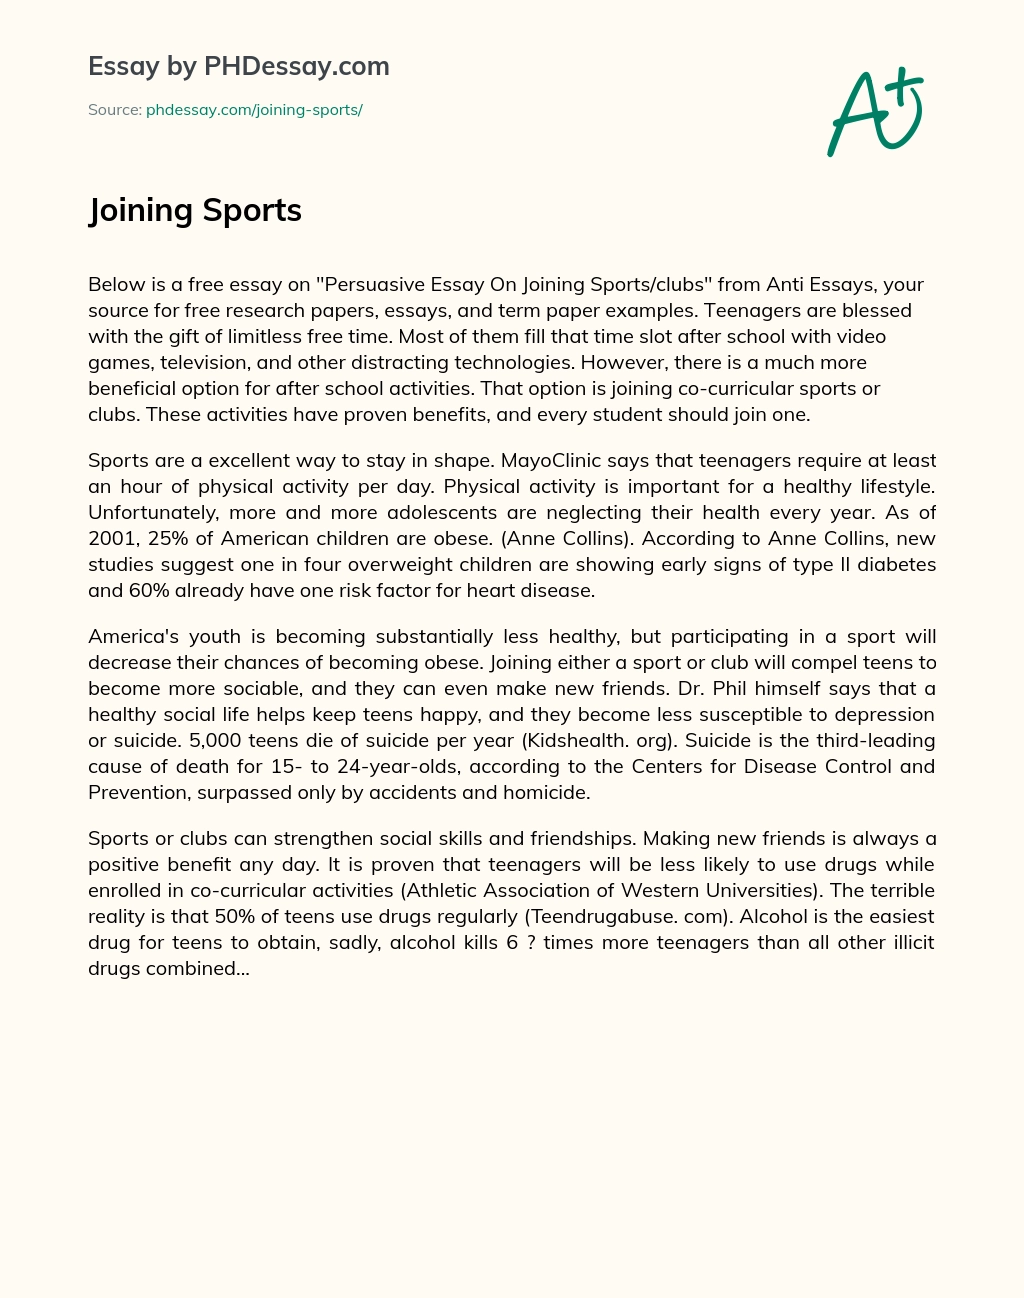 Joining Sports essay